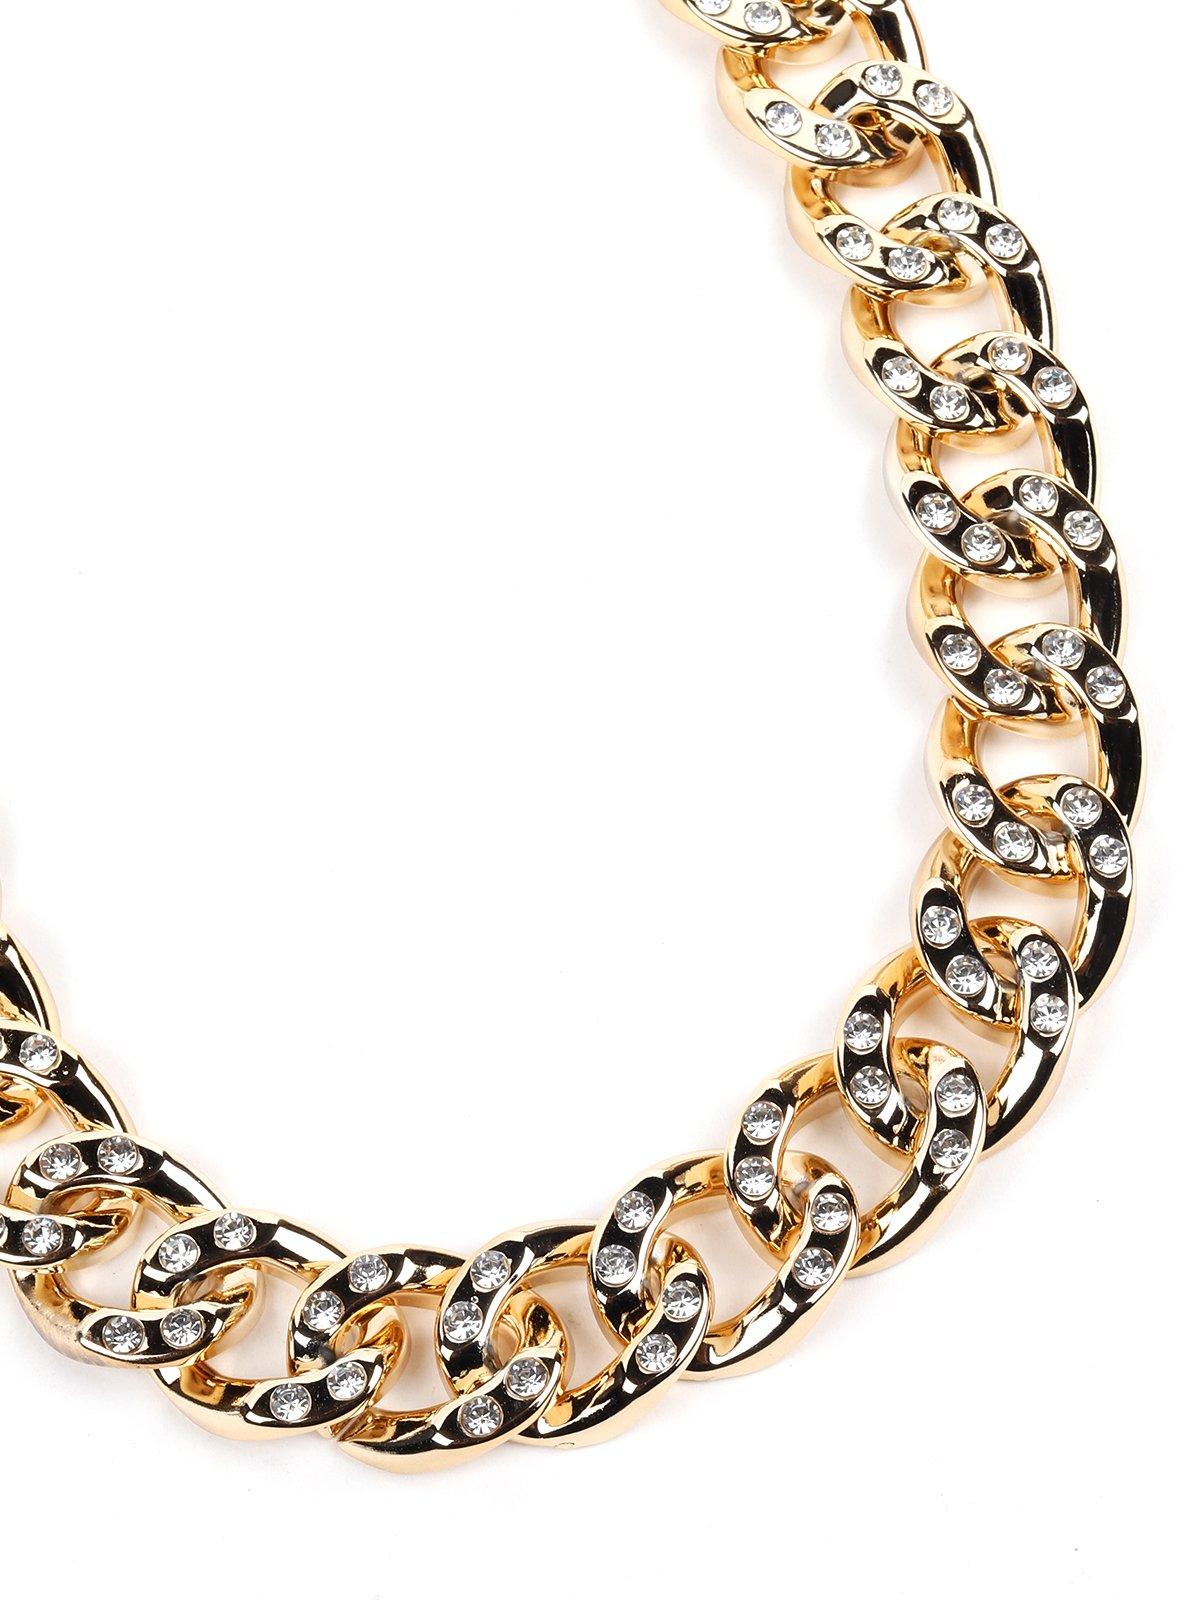 Women's Gold Chunky Interlinked Chain Necklace - Odette